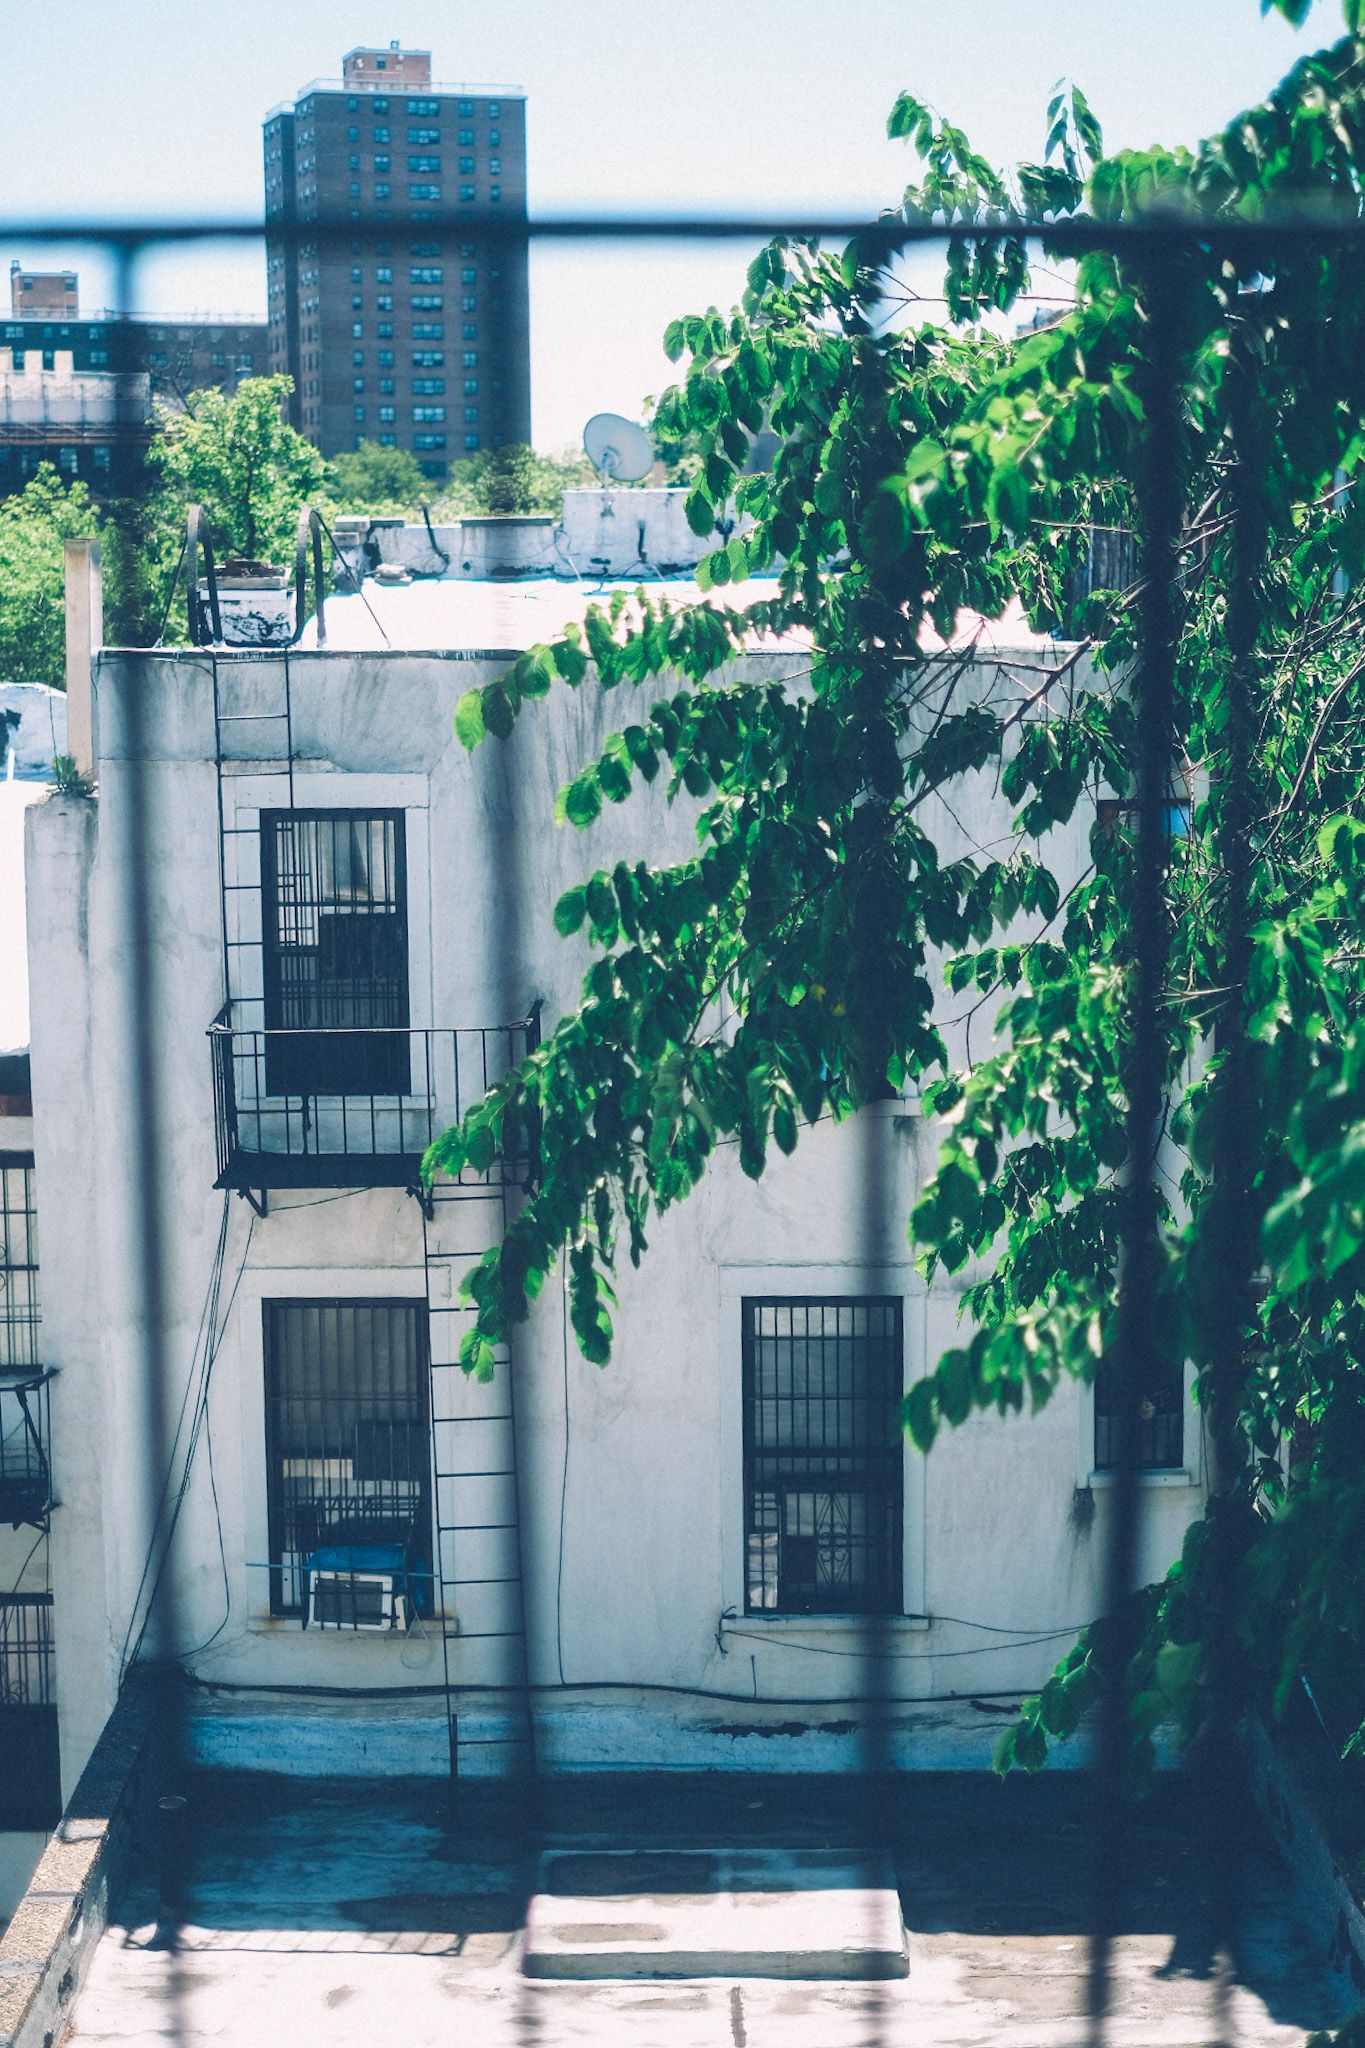 Outside of a different apartment window, the sky is bright and green leaves of trees fall over half of the frame. The other half shows buildings in the foreground and background through fire escape bars, out of focus, but there.